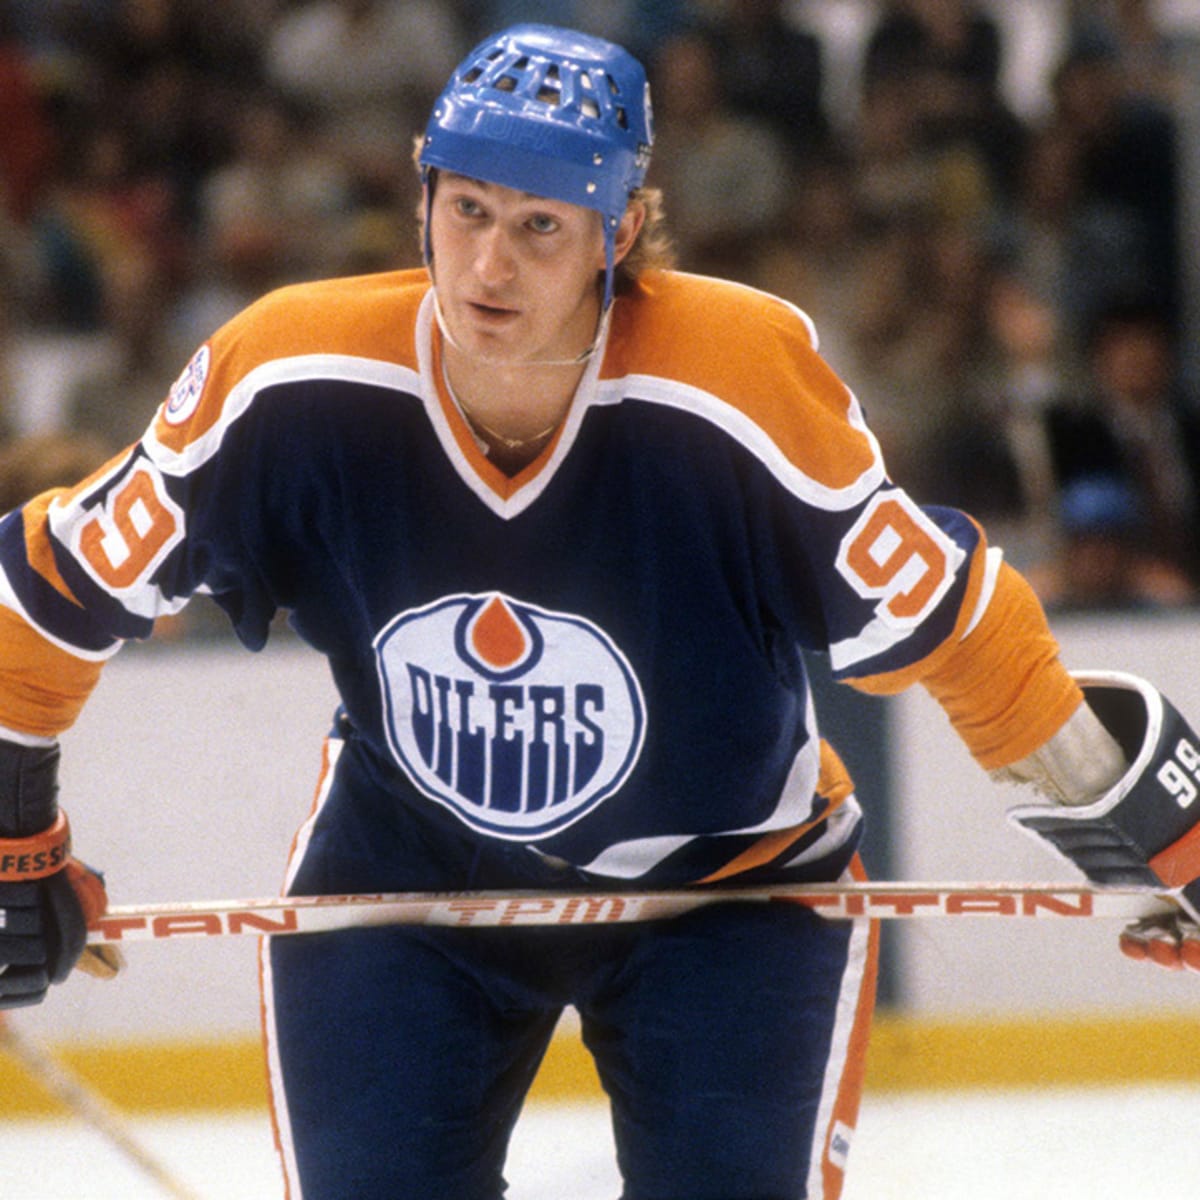 Wayne Gretzky rookie hockey card sets record at auction - Sports Illustrated